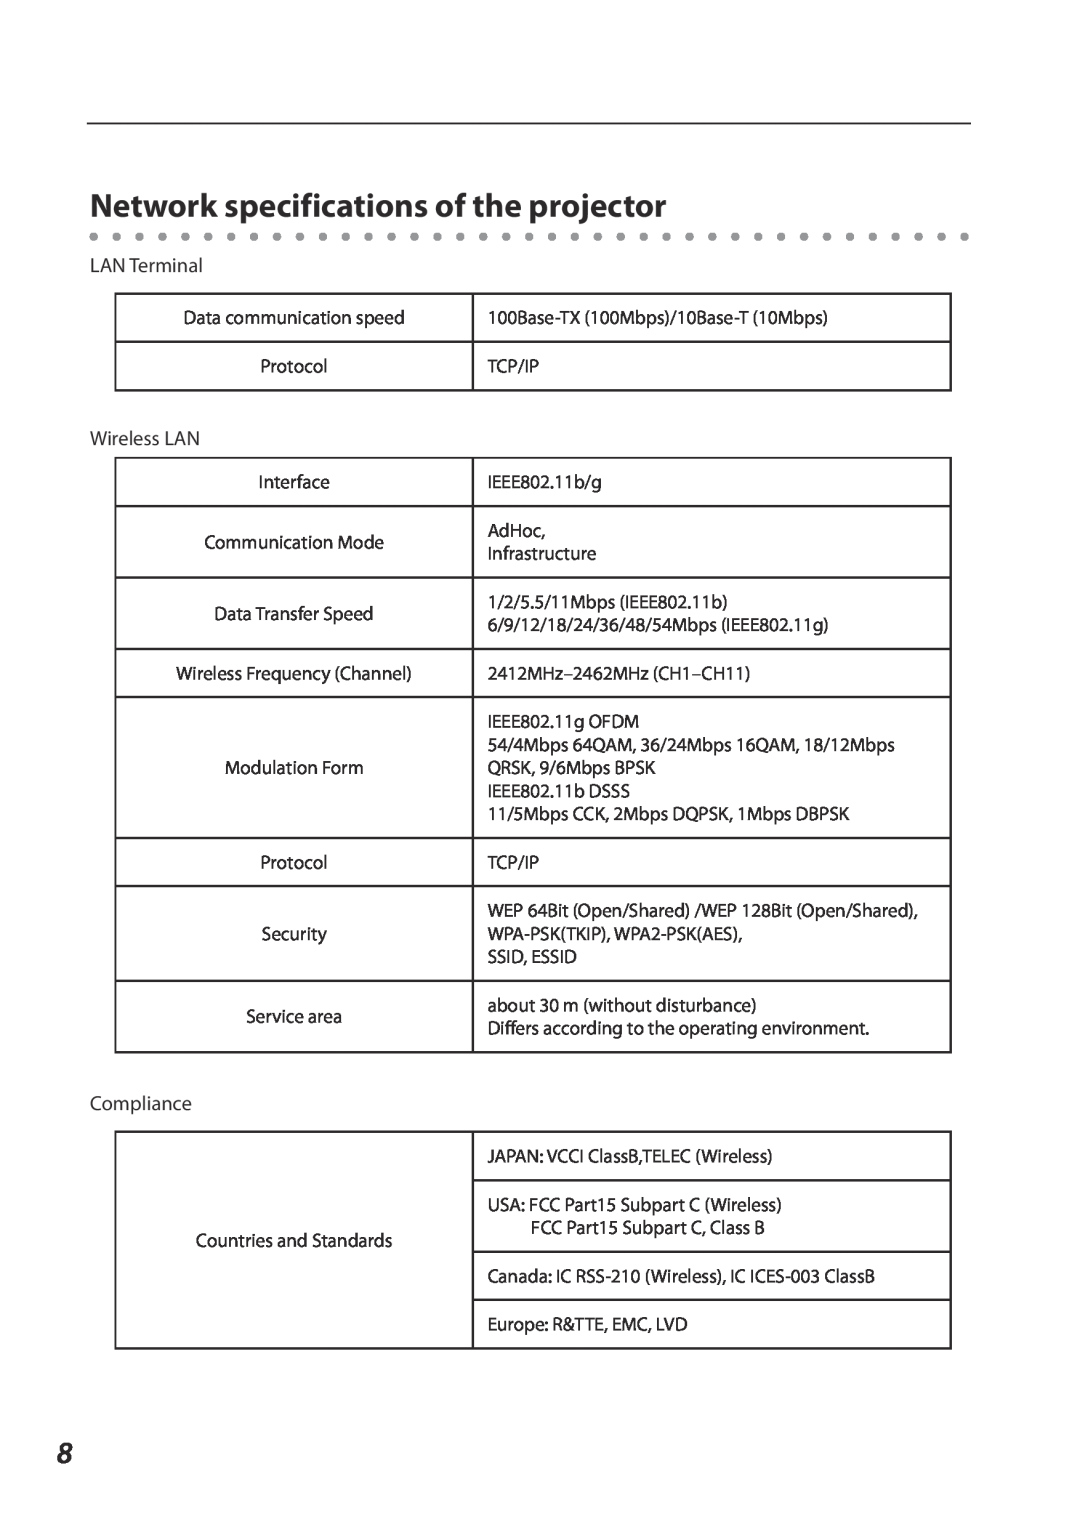 Eiki QXXAVC922---P owner manual Network specifications of the projector, LAN Terminal, Wireless LAN, Compliance 